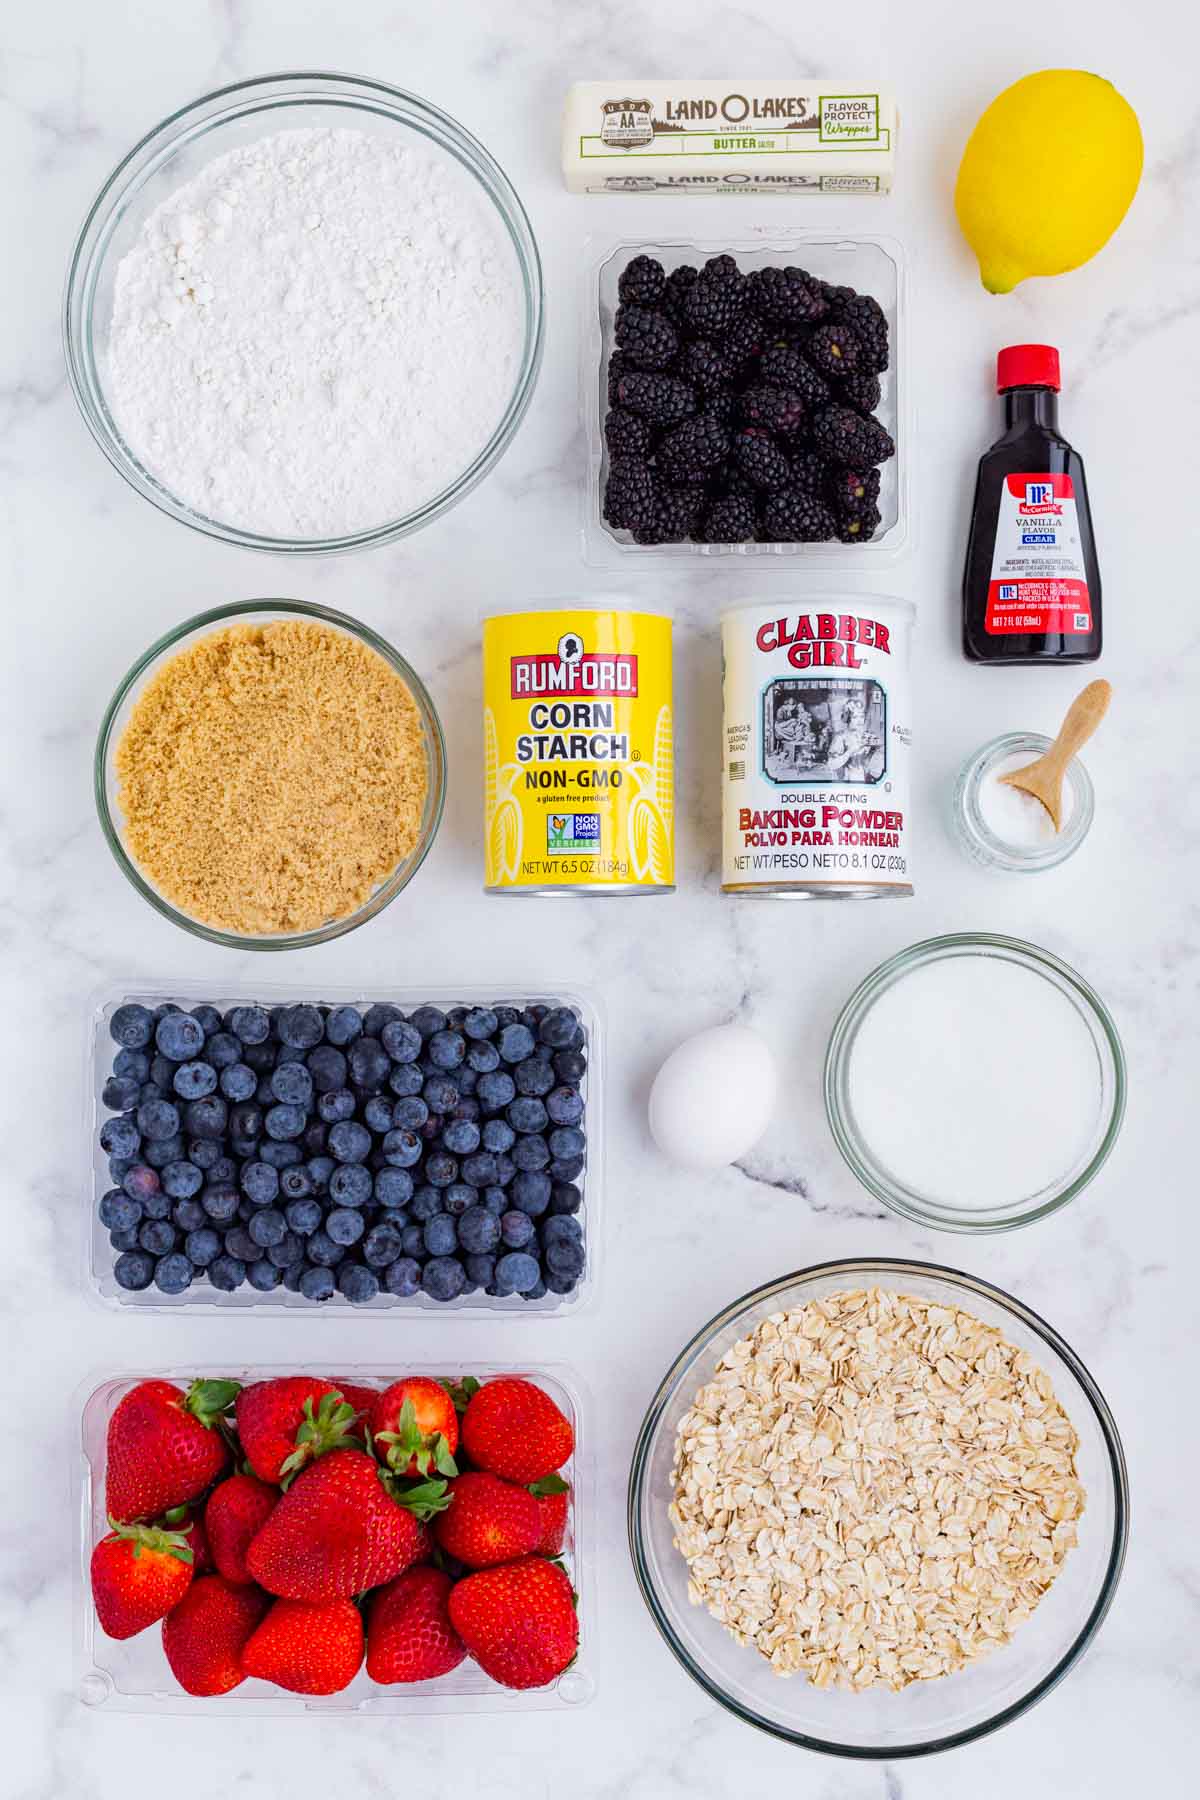 Berries, flour, oats, butter, and sugar and the main ingredients for this dish.